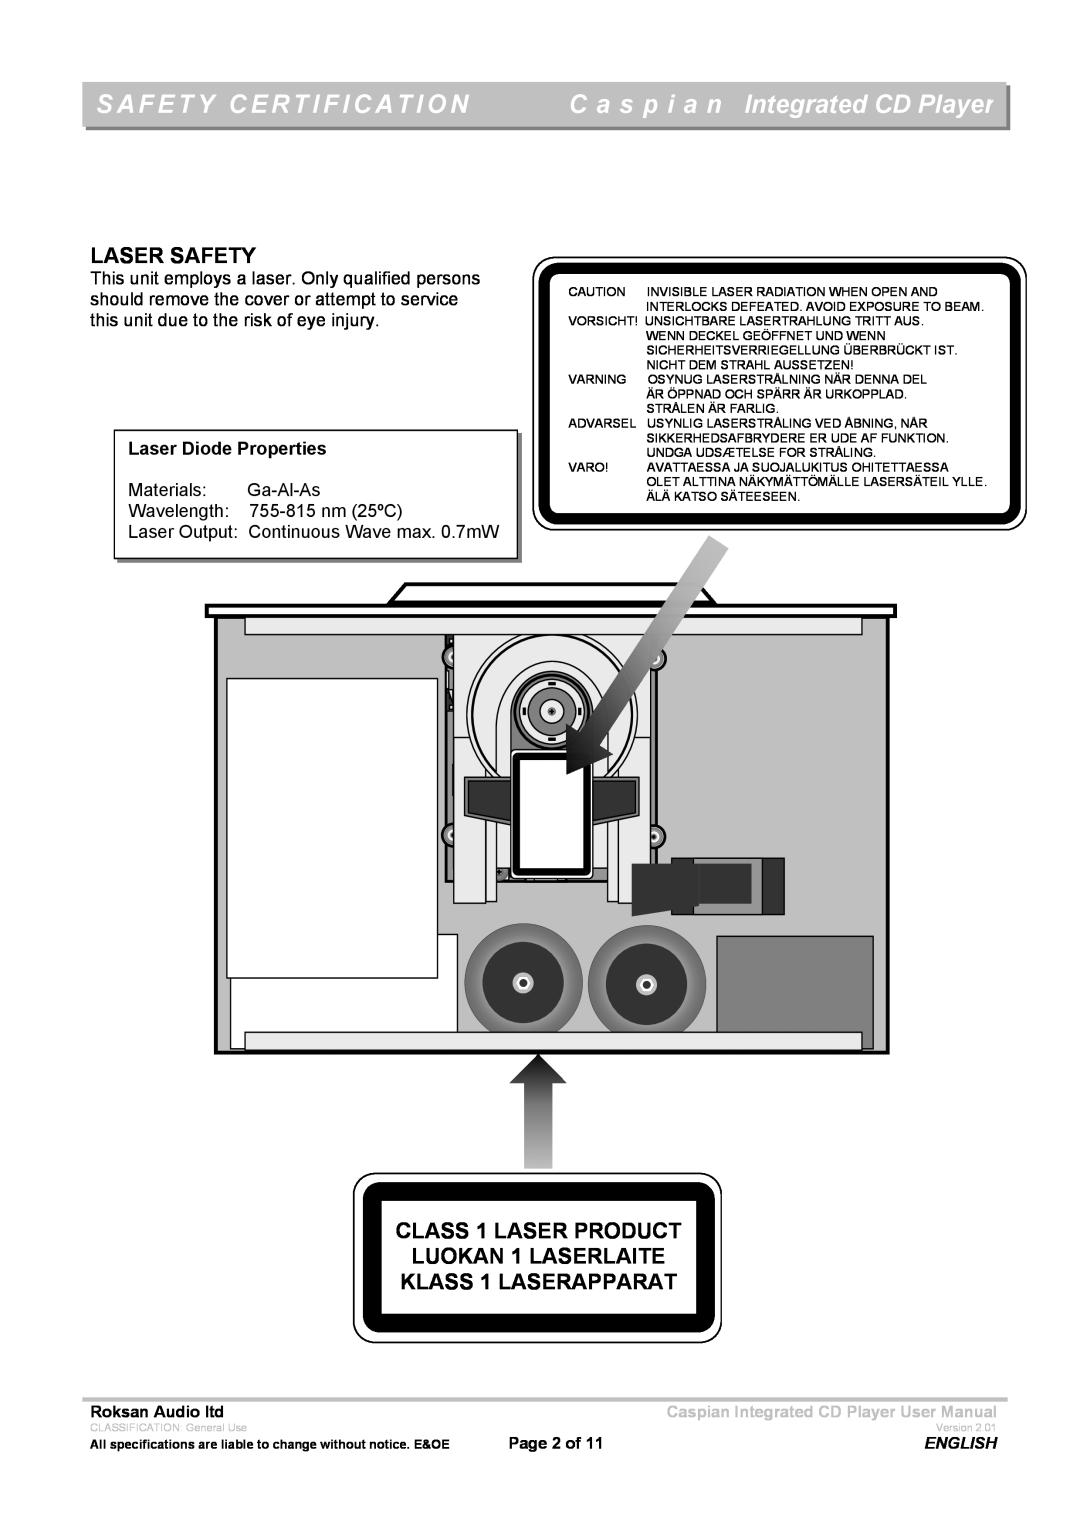 Roksan Audio INTEGRATED CD PLAYER Safety Certification, C a s p i a n Integrated CD Player, Laser Safety, Page 2 of 